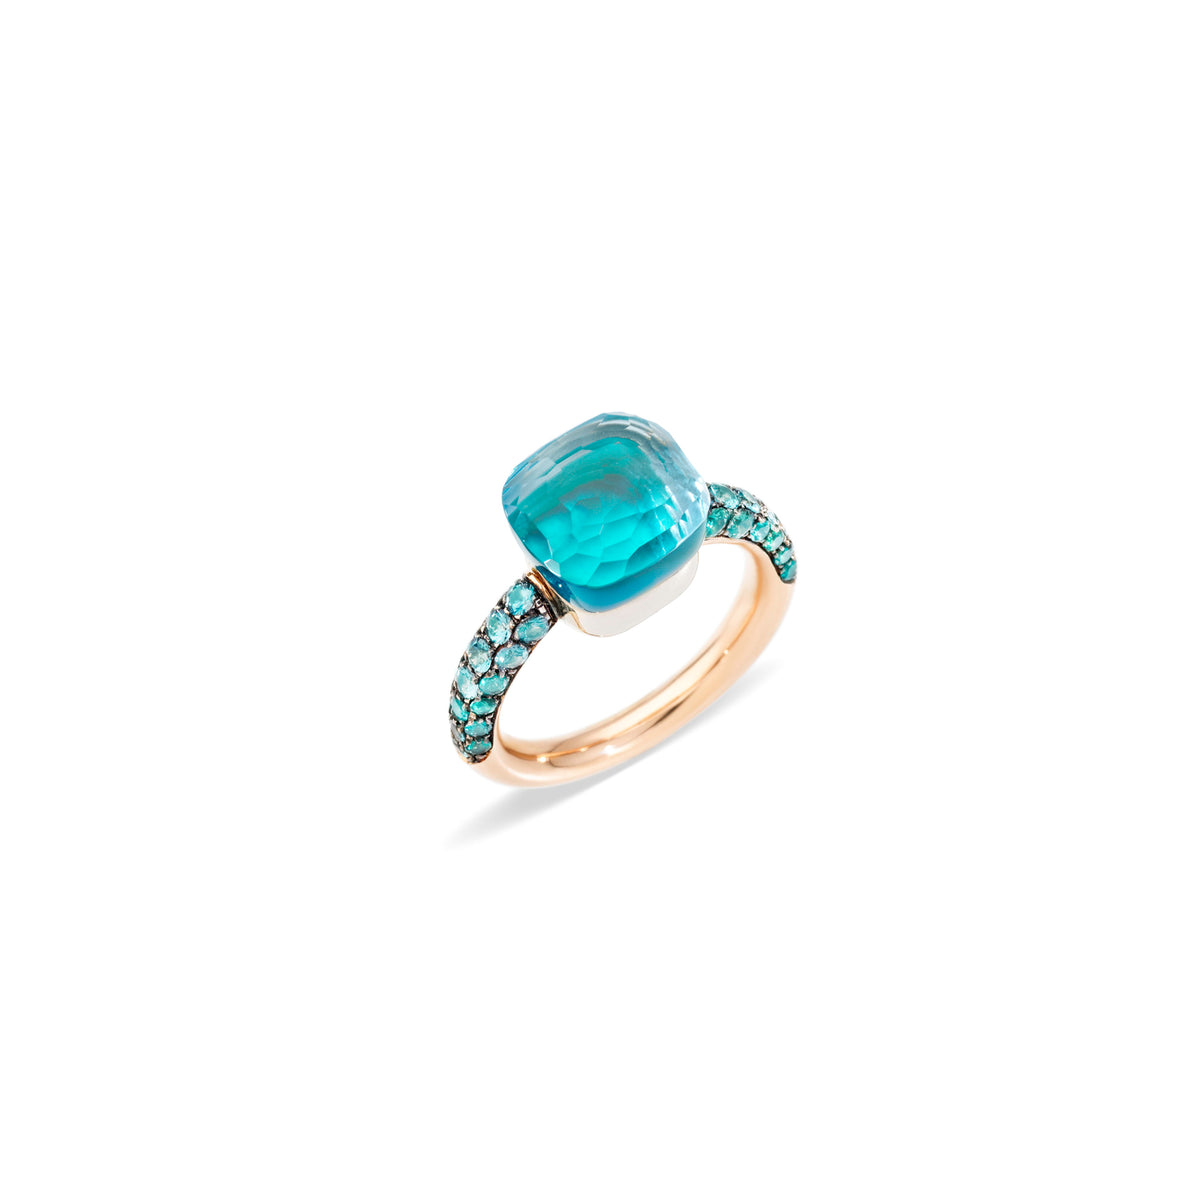 Nudo Deep Blue Ring in 18k Rose Gold and White Gold with Sky Blue Topaz, Agate and Diffused Topaz - Orsini Jewellers NZ